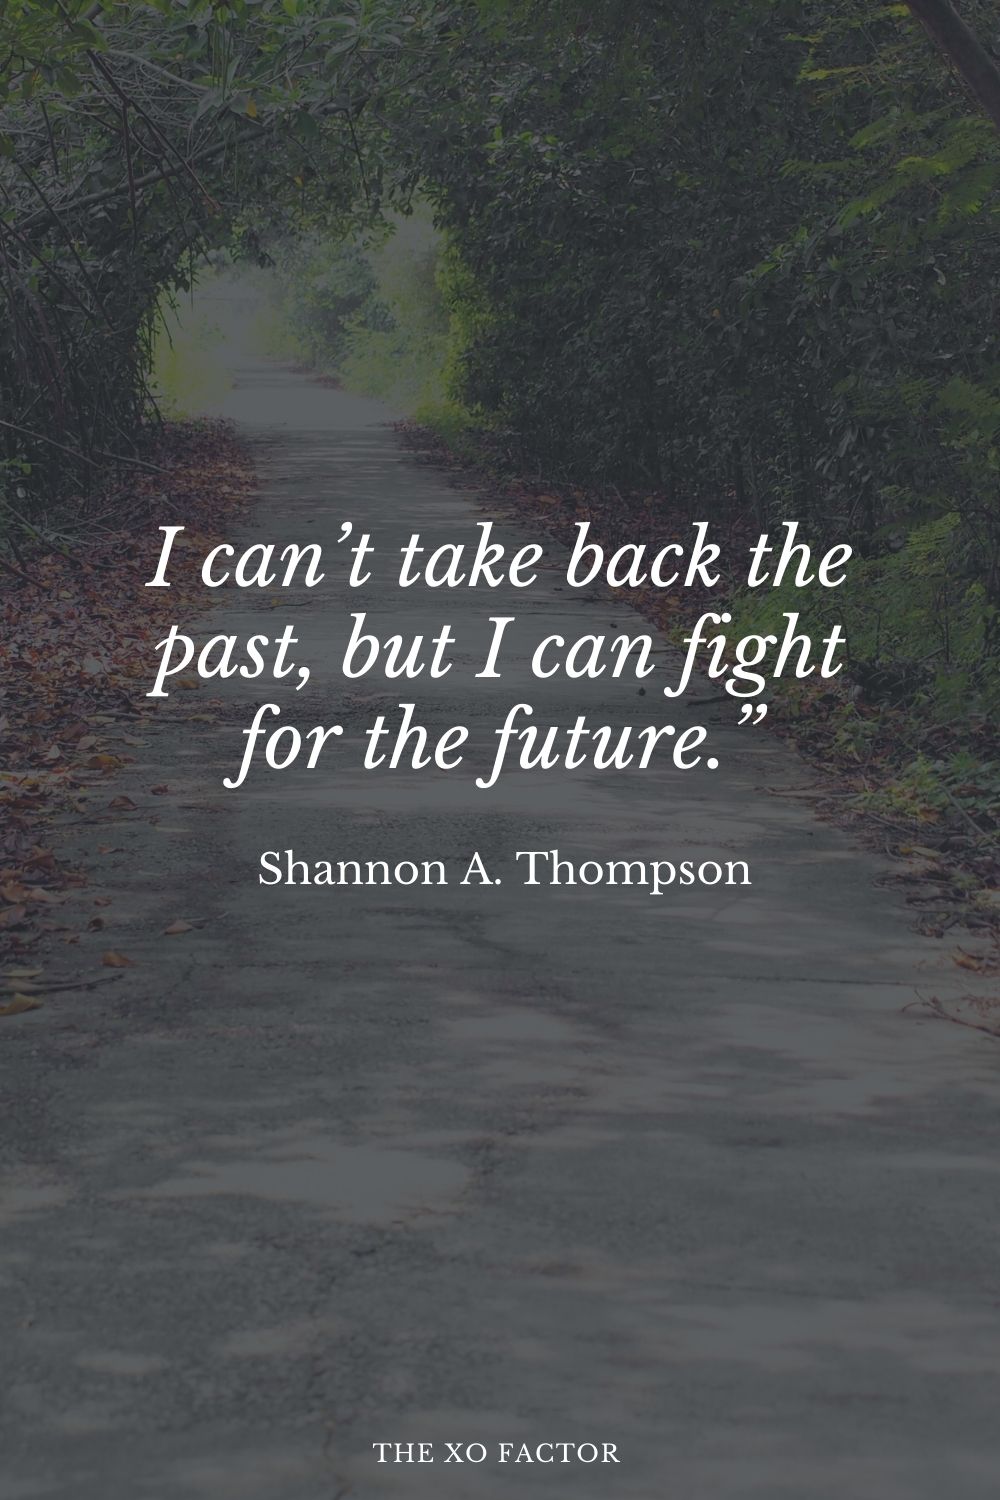 I can’t take back the past, but I can fight for the future.” Shannon A. Thompson